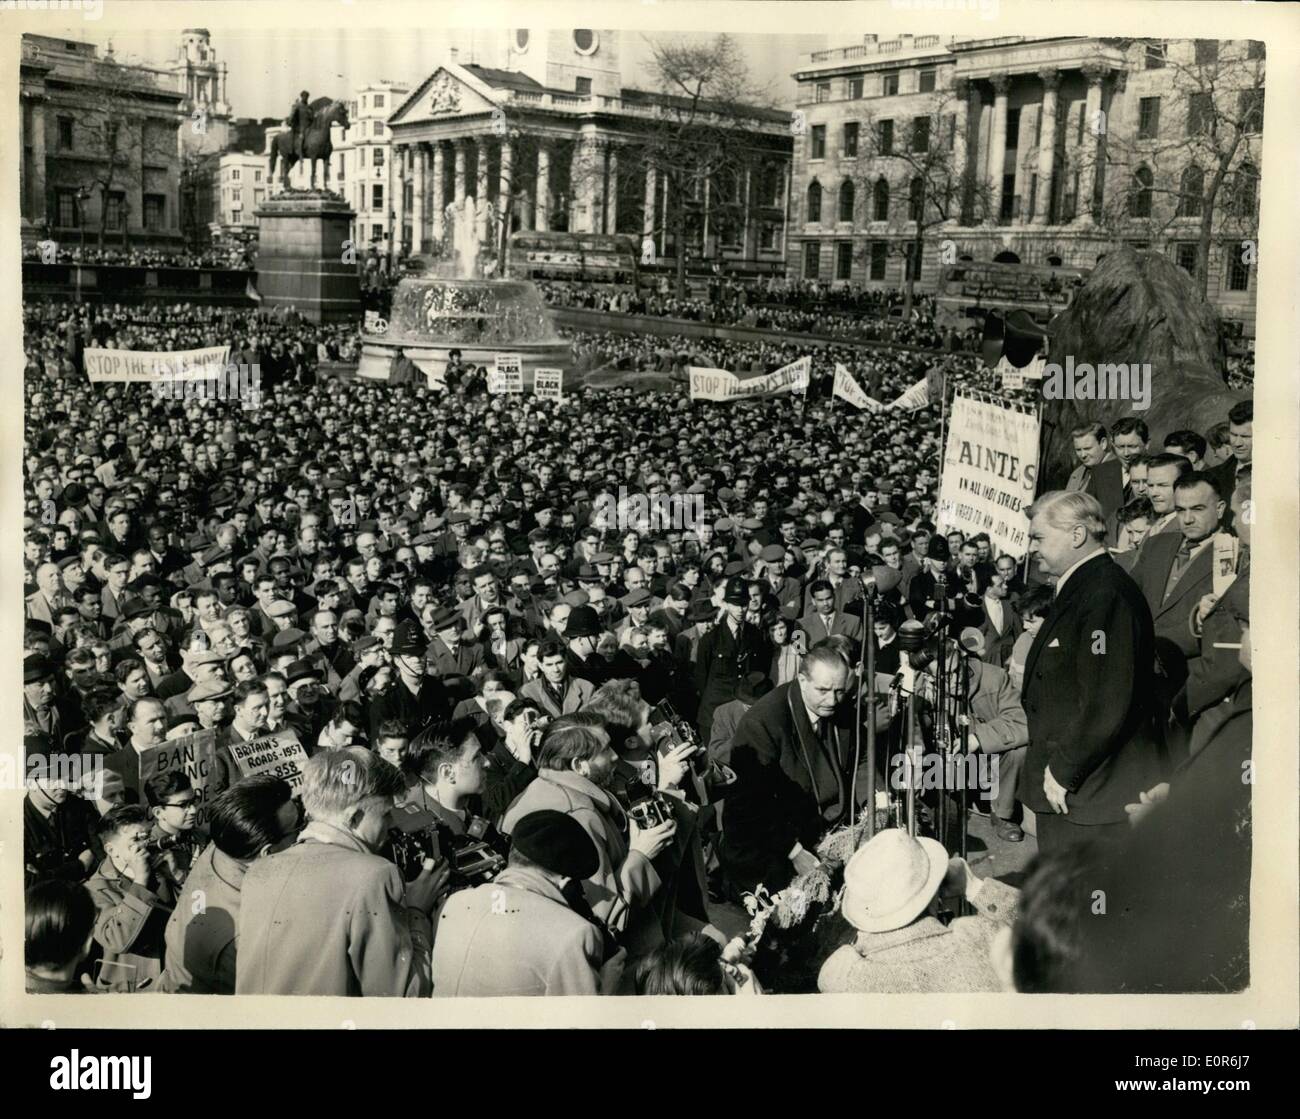 Apr. 13, 1958 - 13-4-58 Labour Party. T.U.C. Stop the tests now demonstration. Aneurin Bevan addresses the gathering. A crowd numbering some thousands congregated in Trafalgar Square this afternoon for the Labour Party and T.U.C. anti Ã¢â‚¬ËœH' Bomb demonstration. The speakers included Mr. Gaitskell and Mr. Aneurin Bevan. Keystone Photo Shows: Mr. Aneurin Bevan addresses the huge crowd in Trafalgar Square this afternoon. Stock Photo